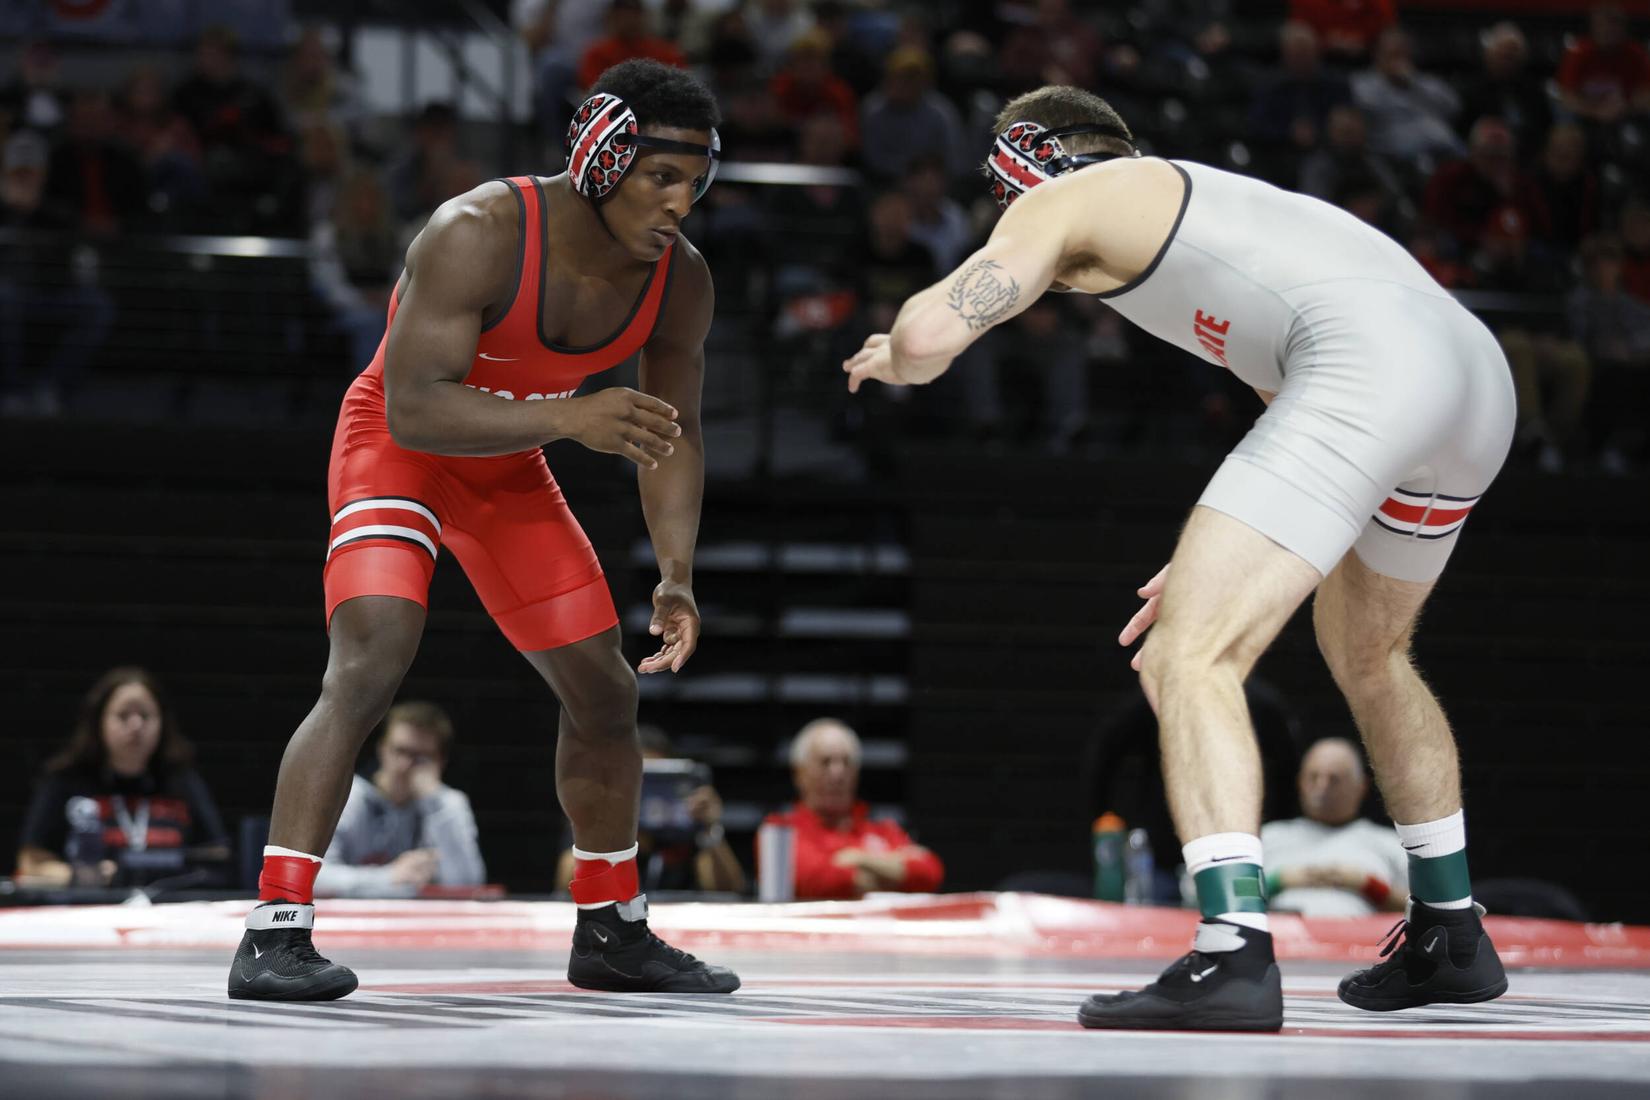 Wrestling: An inside look at competing 'unattached' as an Ohio State  wrestler – The Lantern